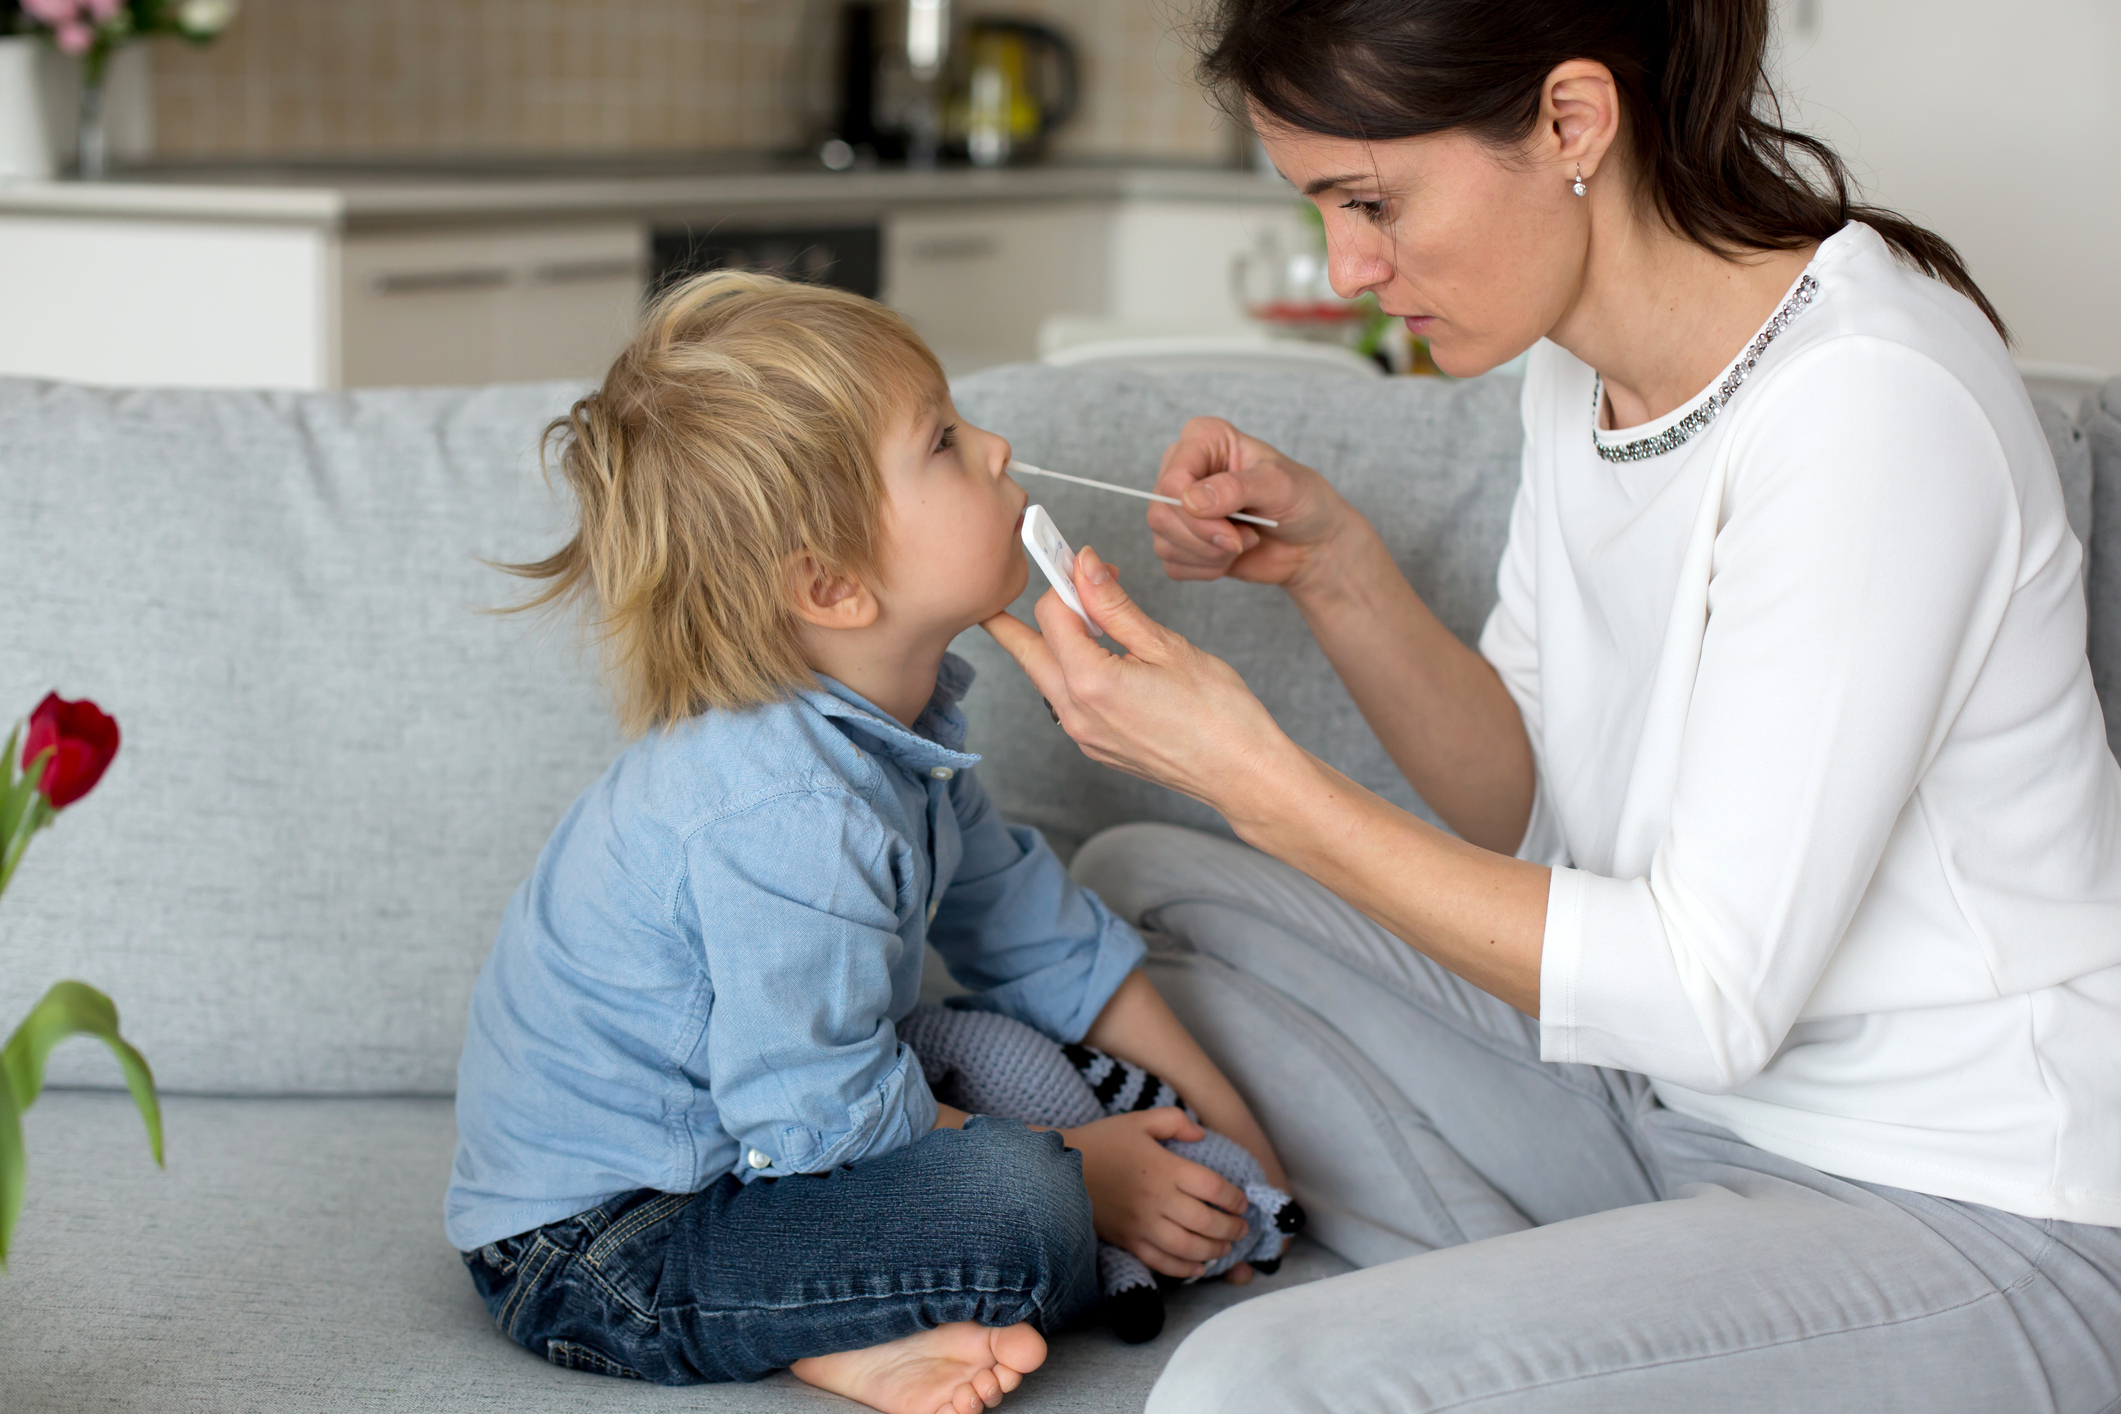 Mother giving child a nasal swab COVID test